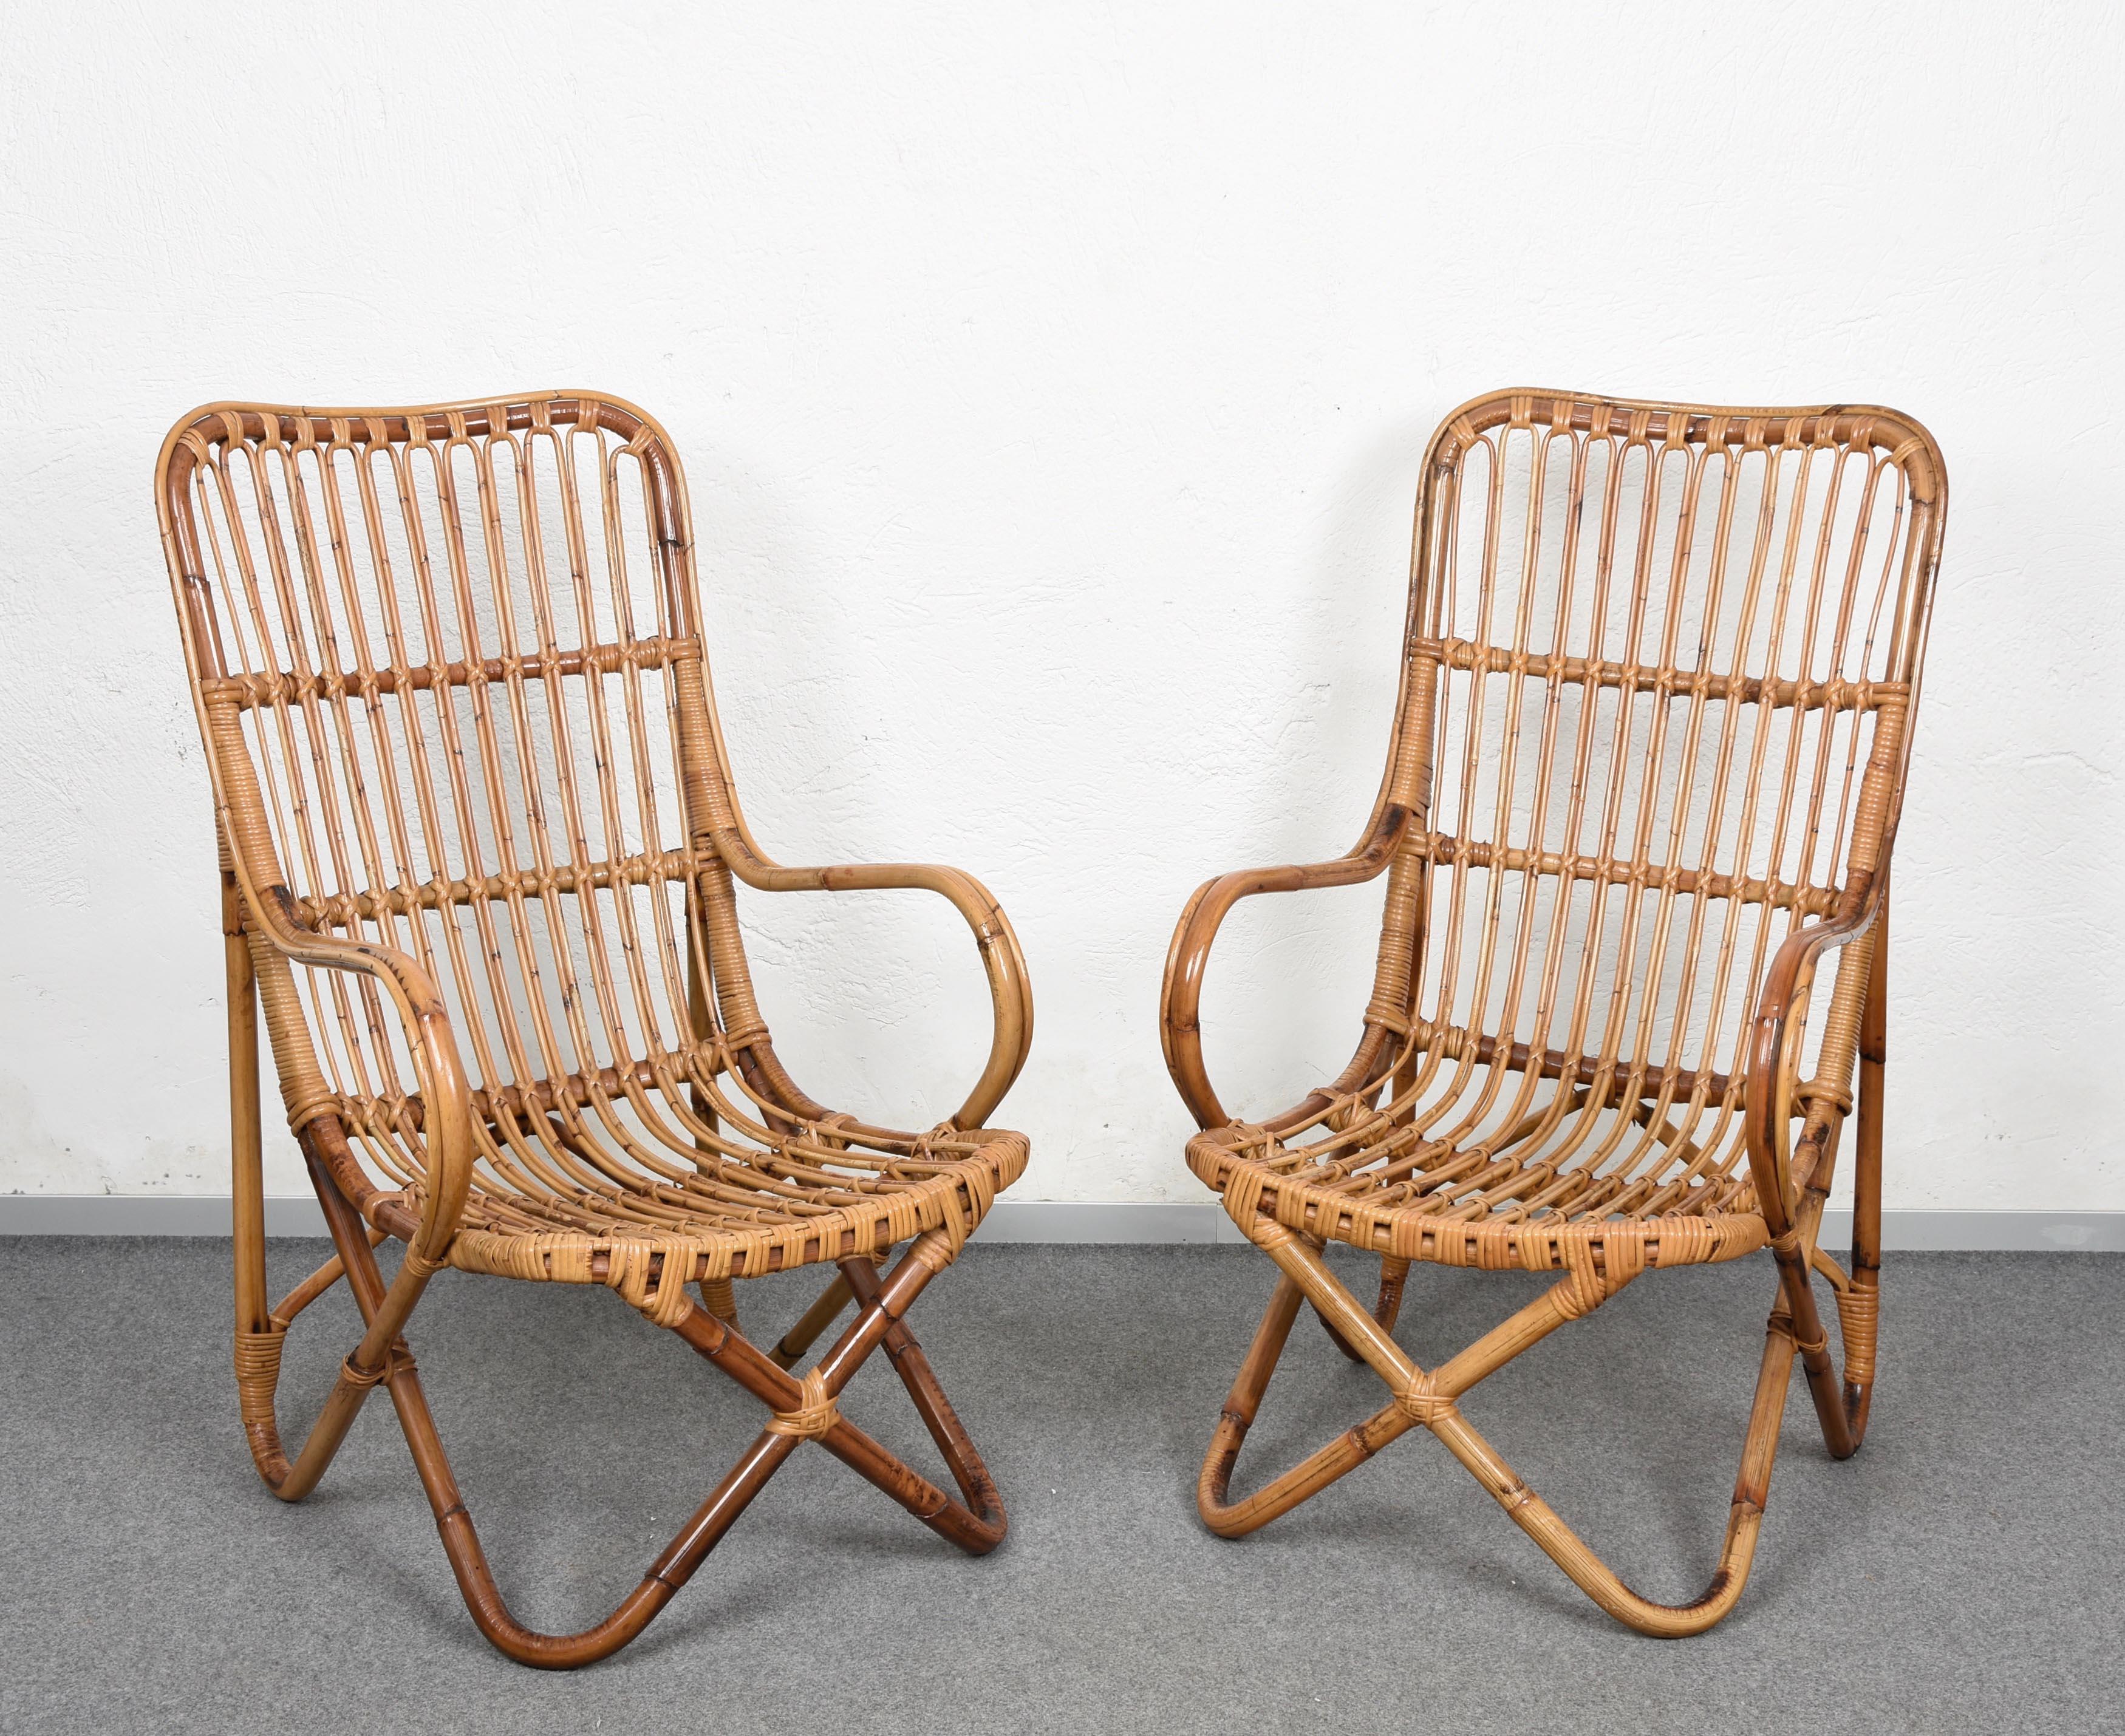 Incredible pair of Mid-Century Modern rattan and bamboo armchairs. This fantastic set was made in Italy during the 1960s in the style of Tito Agnoli.

The seat is made of thin rattan elements while the structural elements are in bamboo, which